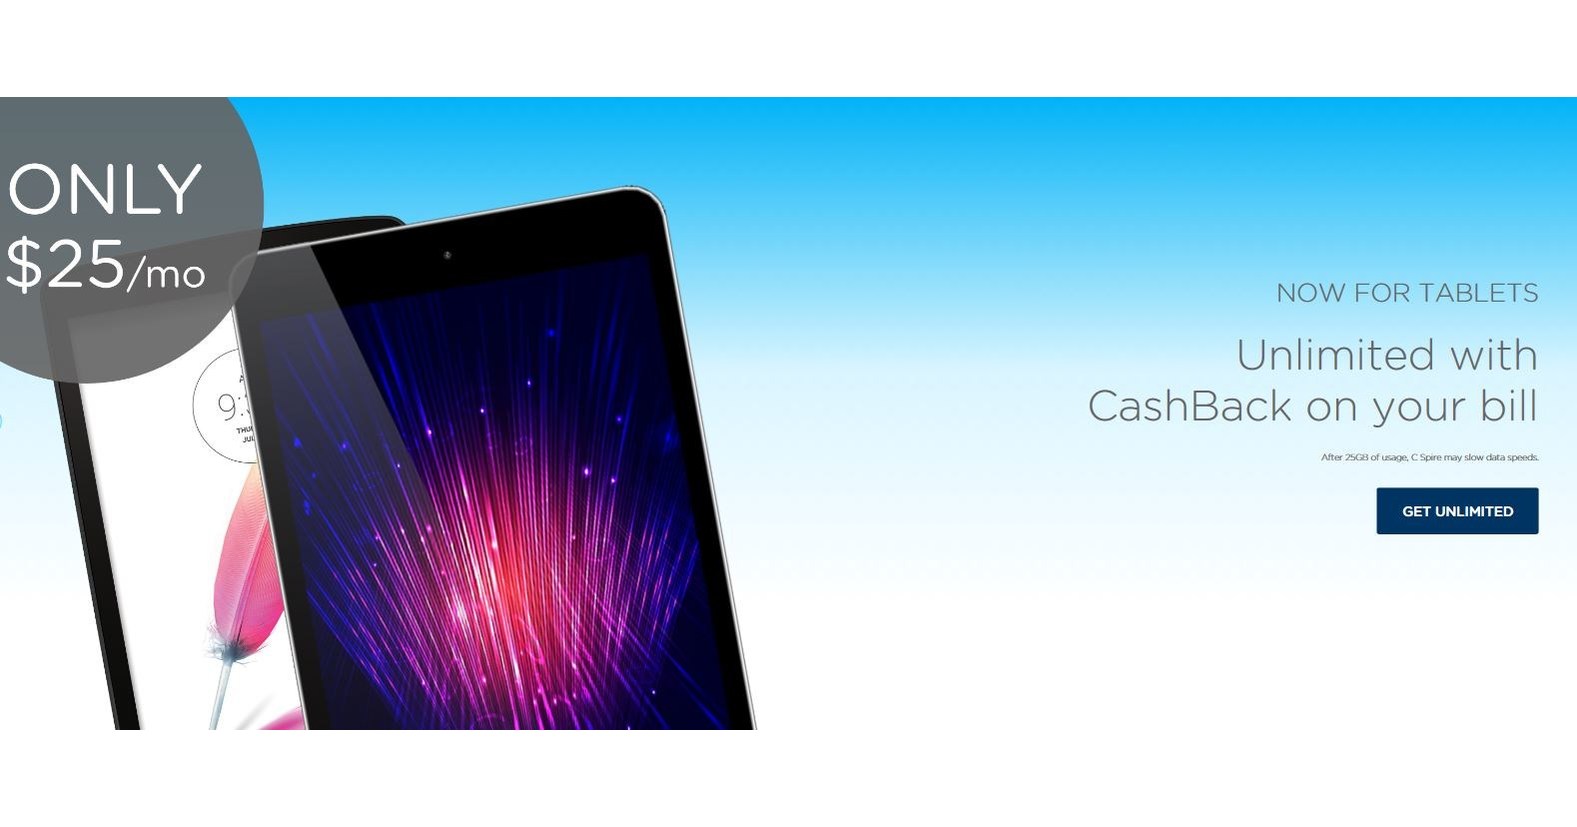 C Spire Introduces New Unlimited Data Plan With Cash Back For Tablets